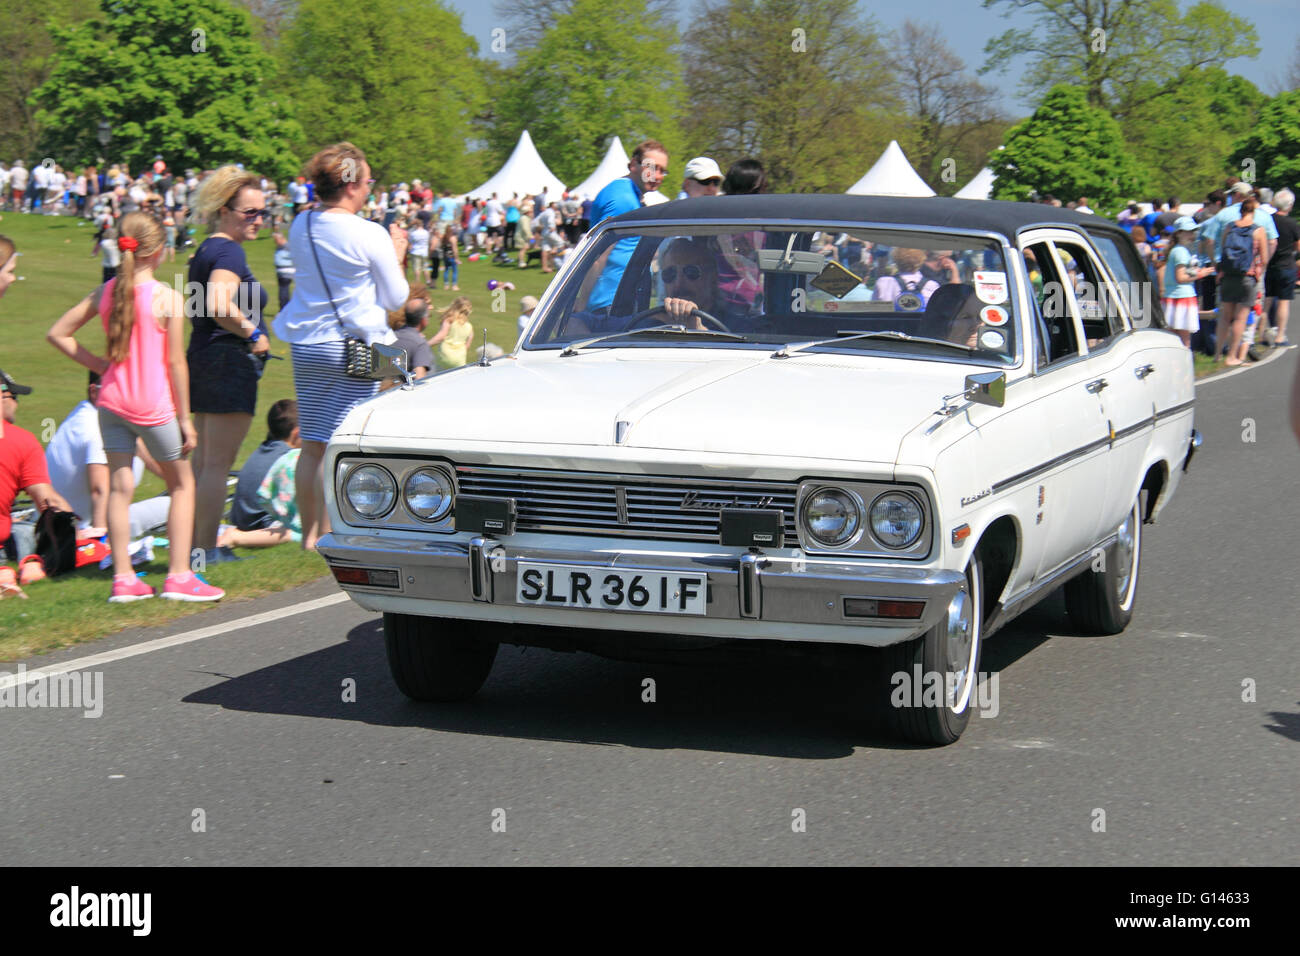 Vauxhall Cresta PC 3.3 Deluxe Estate (1967). Chestnut Sunday, 8th May 2016. Bushy Park, Hampton Court, London Borough of Richmond, England, Great Britain, United Kingdom, UK, Europe. Vintage and classic vehicle parade and displays with fairground attractions and military reenactments. Credit:  Ian Bottle / Alamy Live News Stock Photo